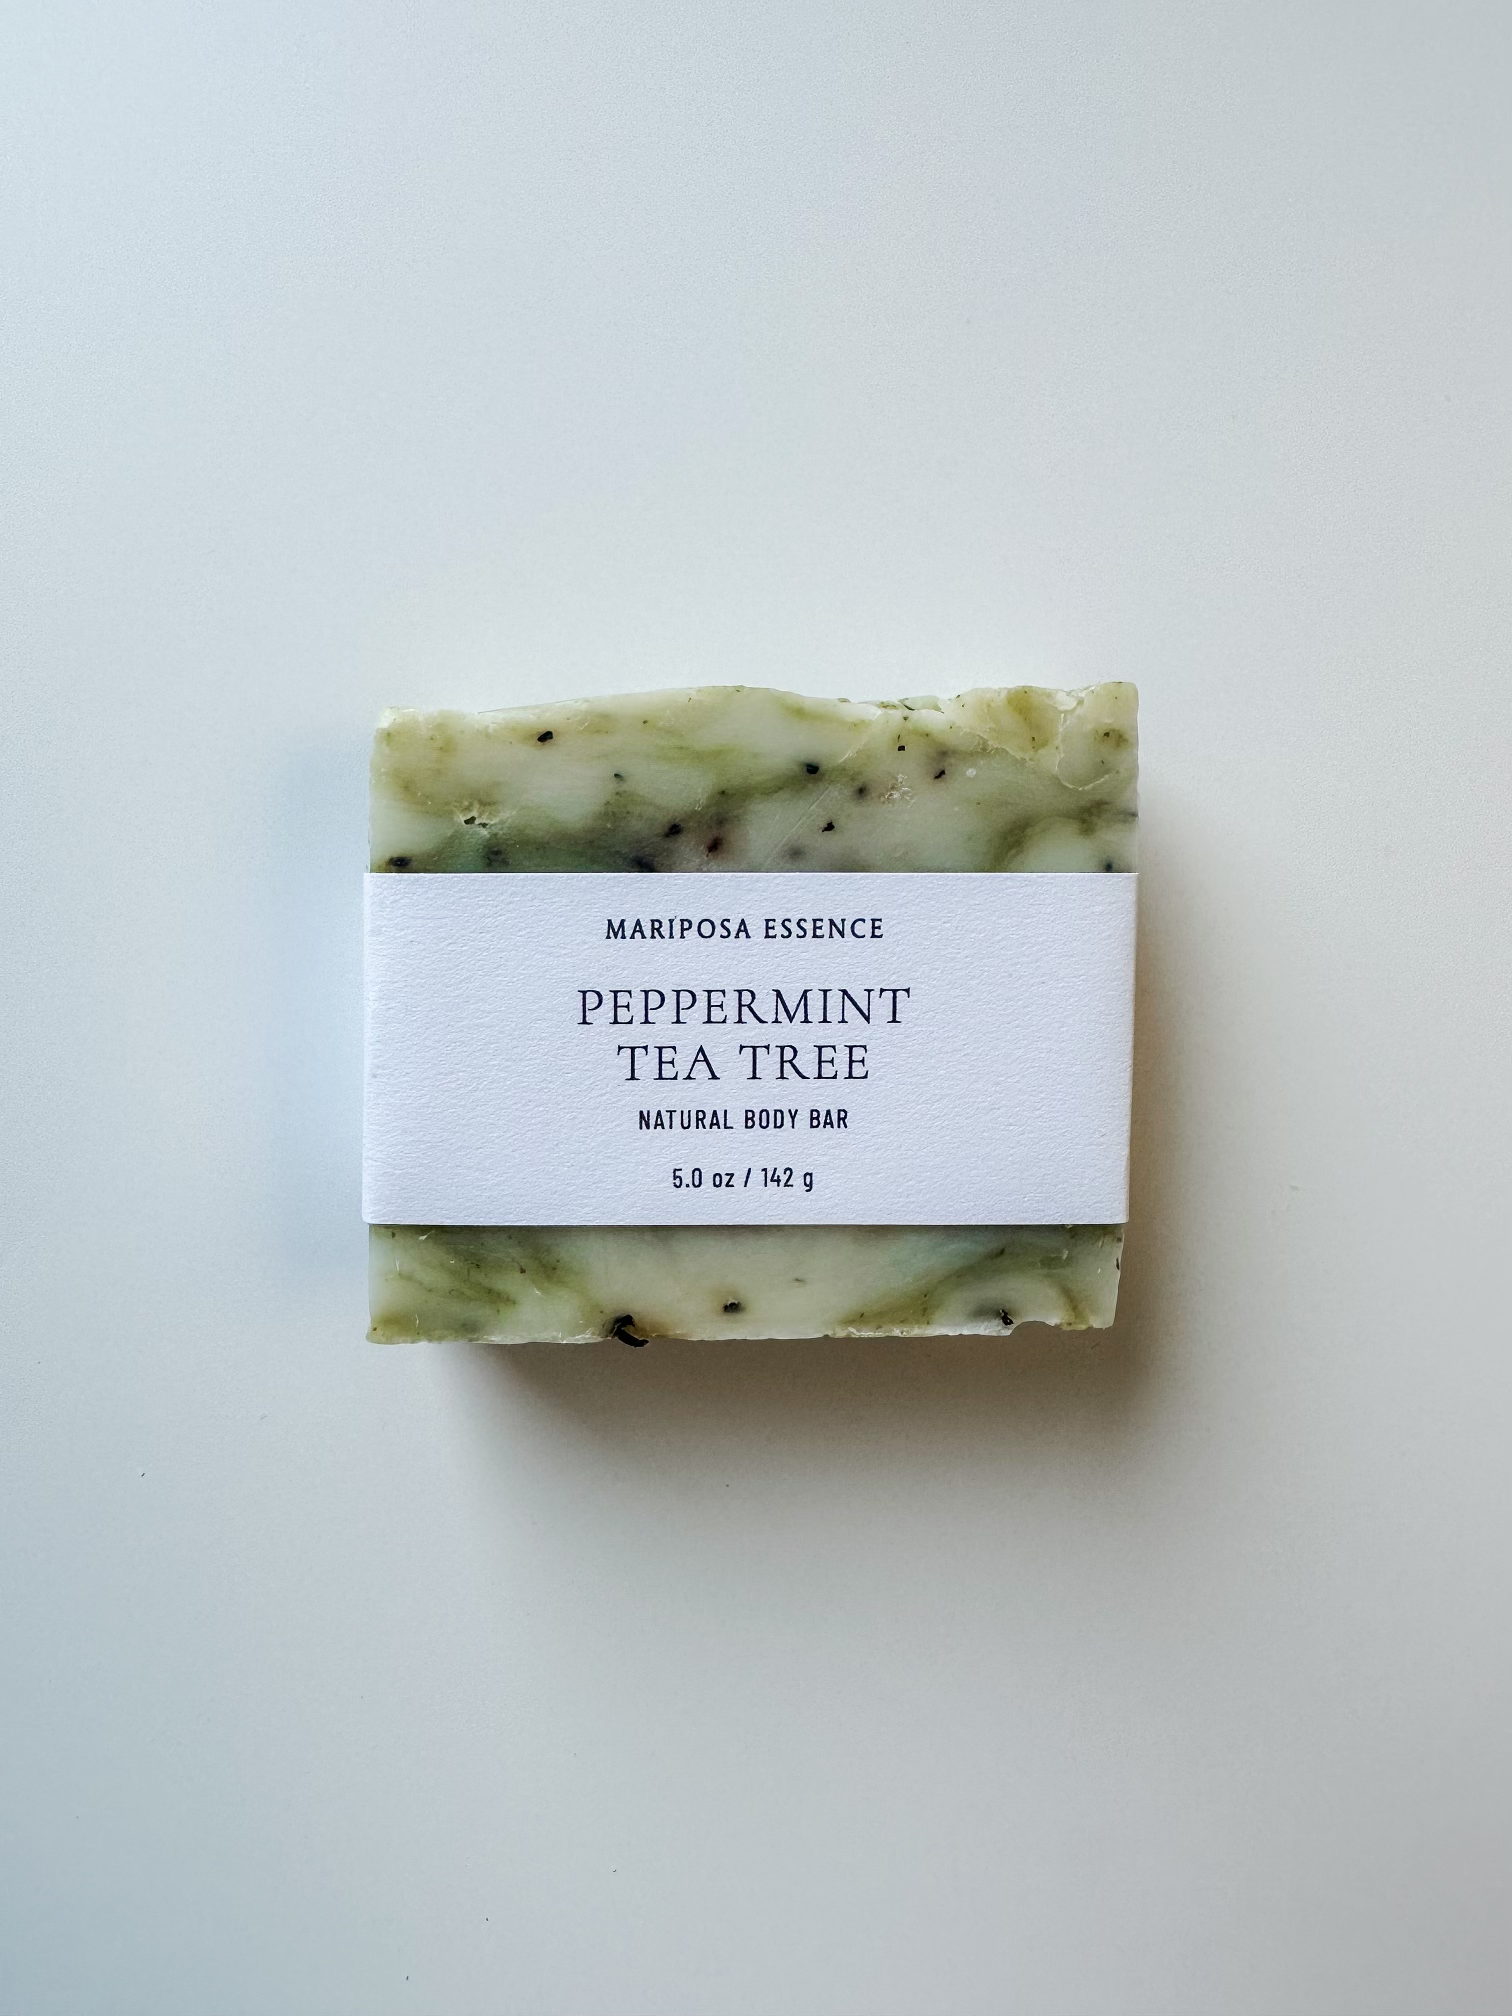 Peppermint Tea Tree body bar with crushed peppermint leaves